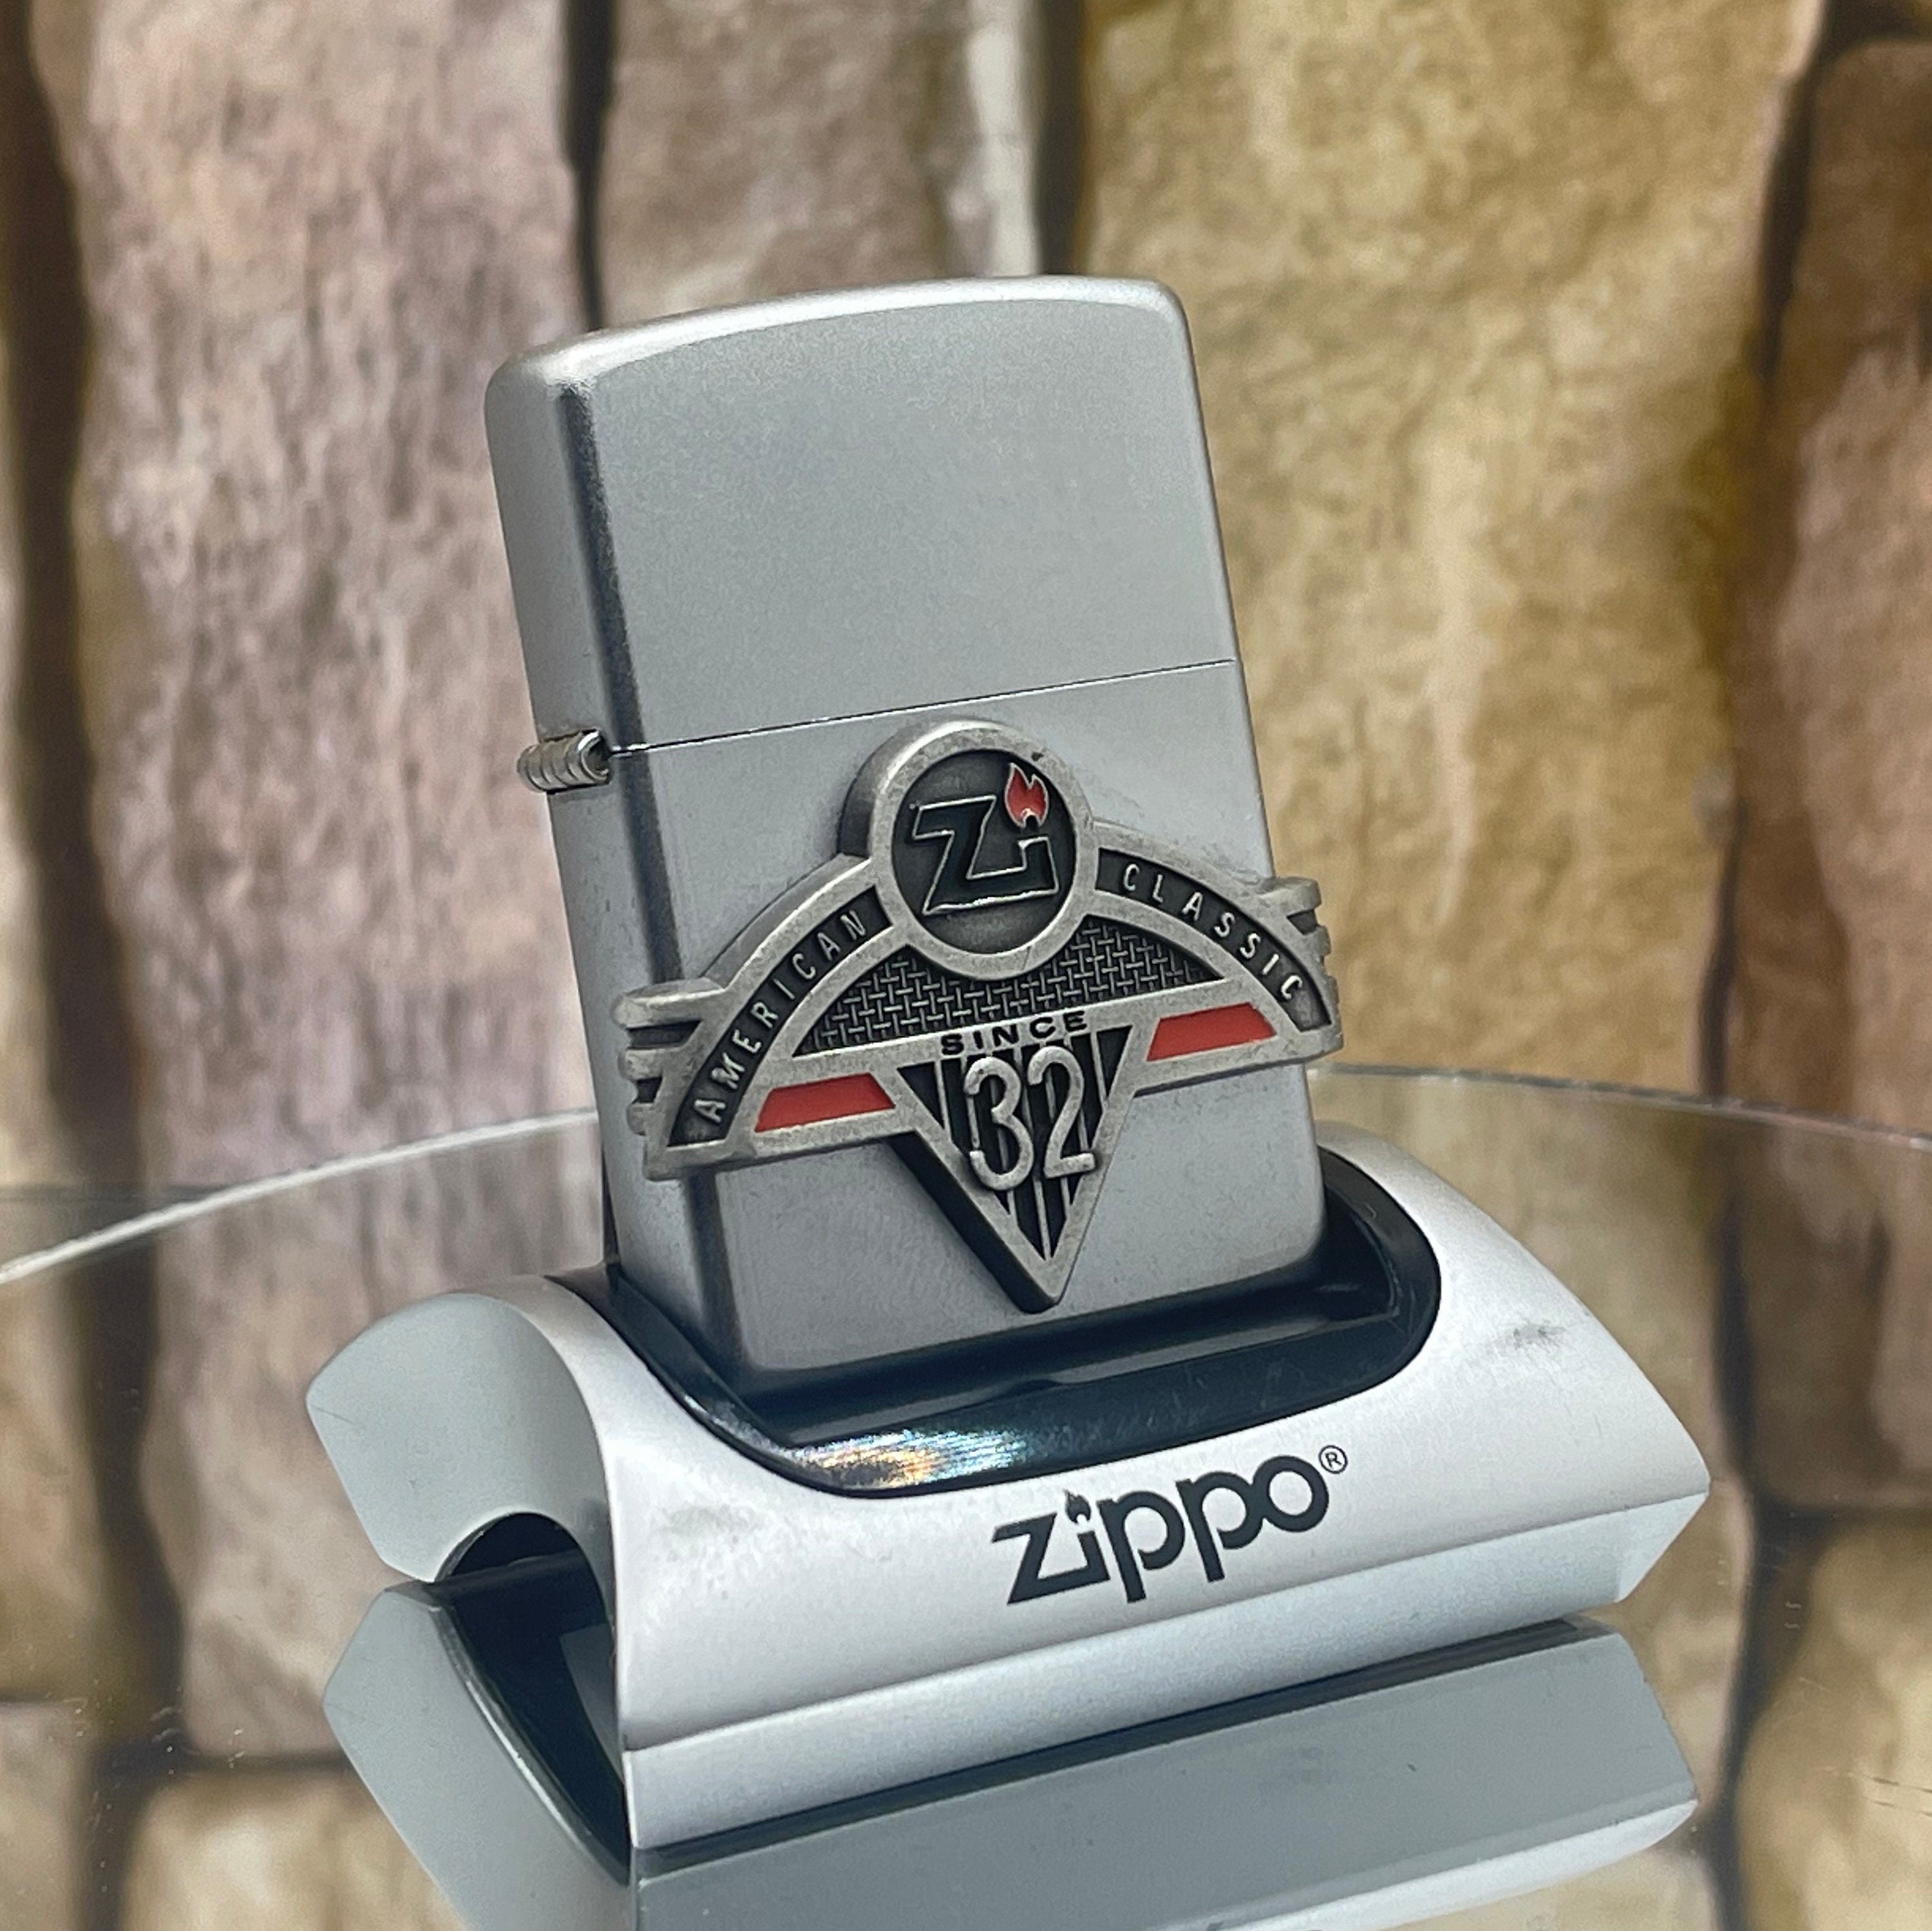 2001 Zippo American Classic Since 1932 New & Unfired - Etsy